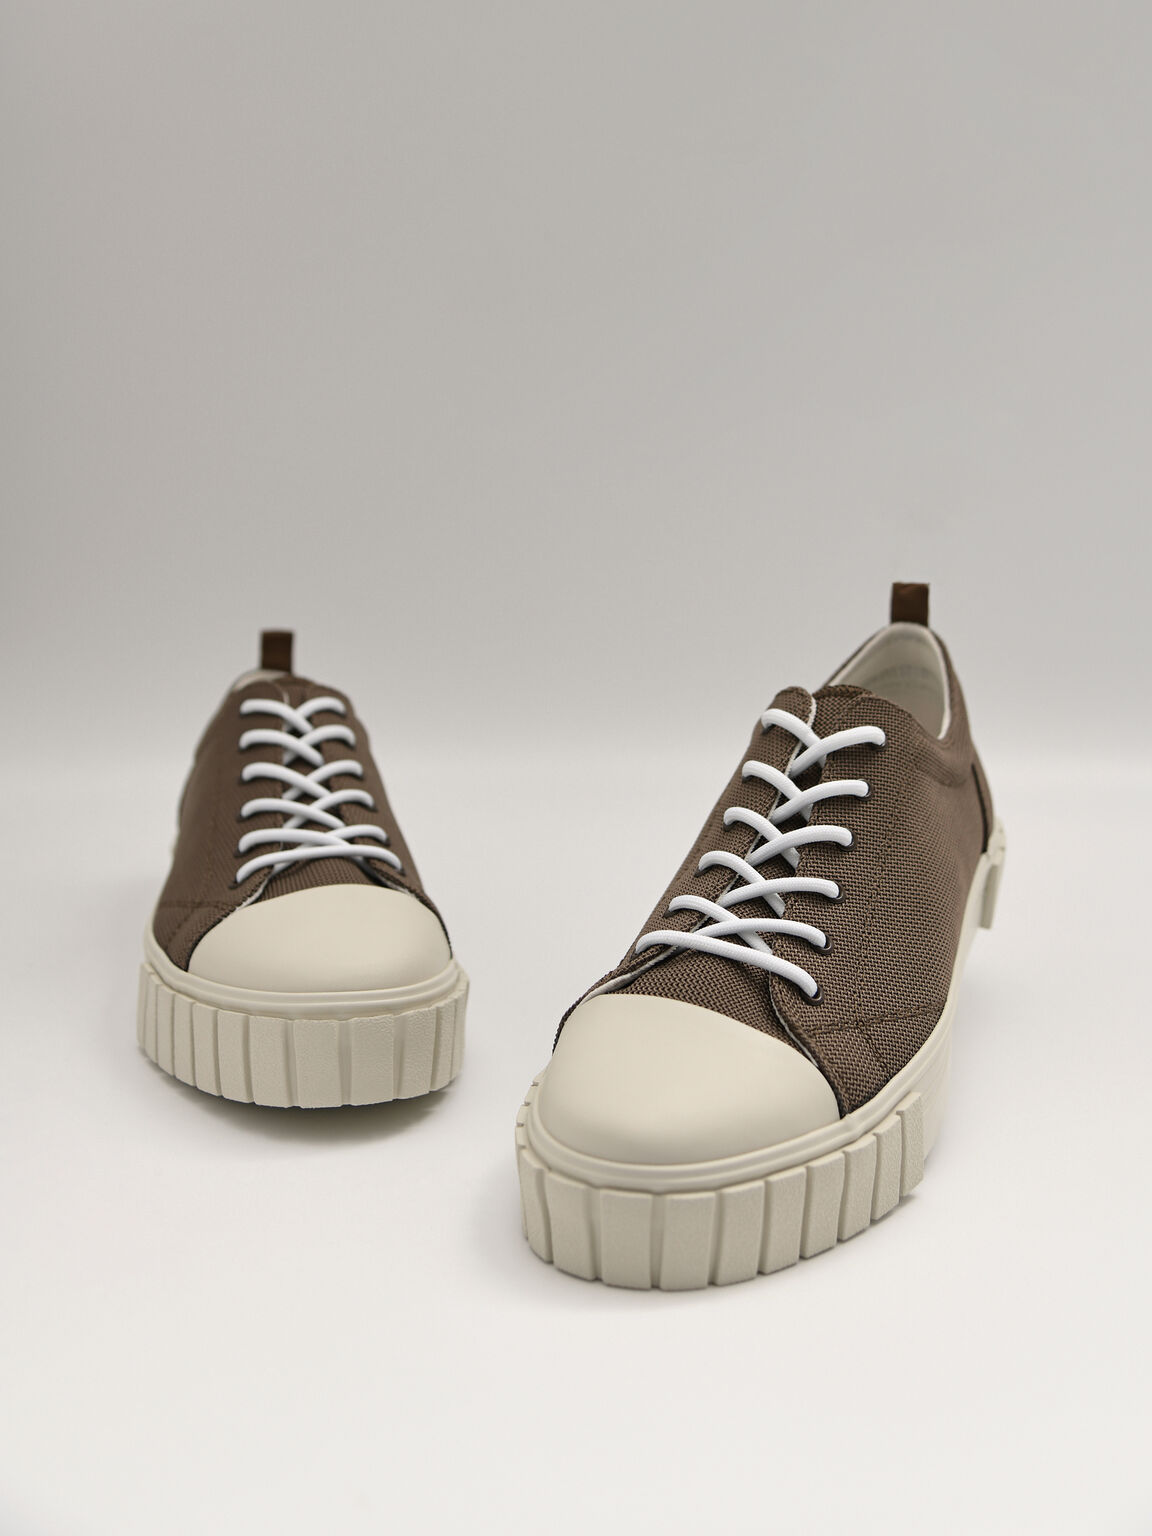 Beat Court Sneakers, Olive